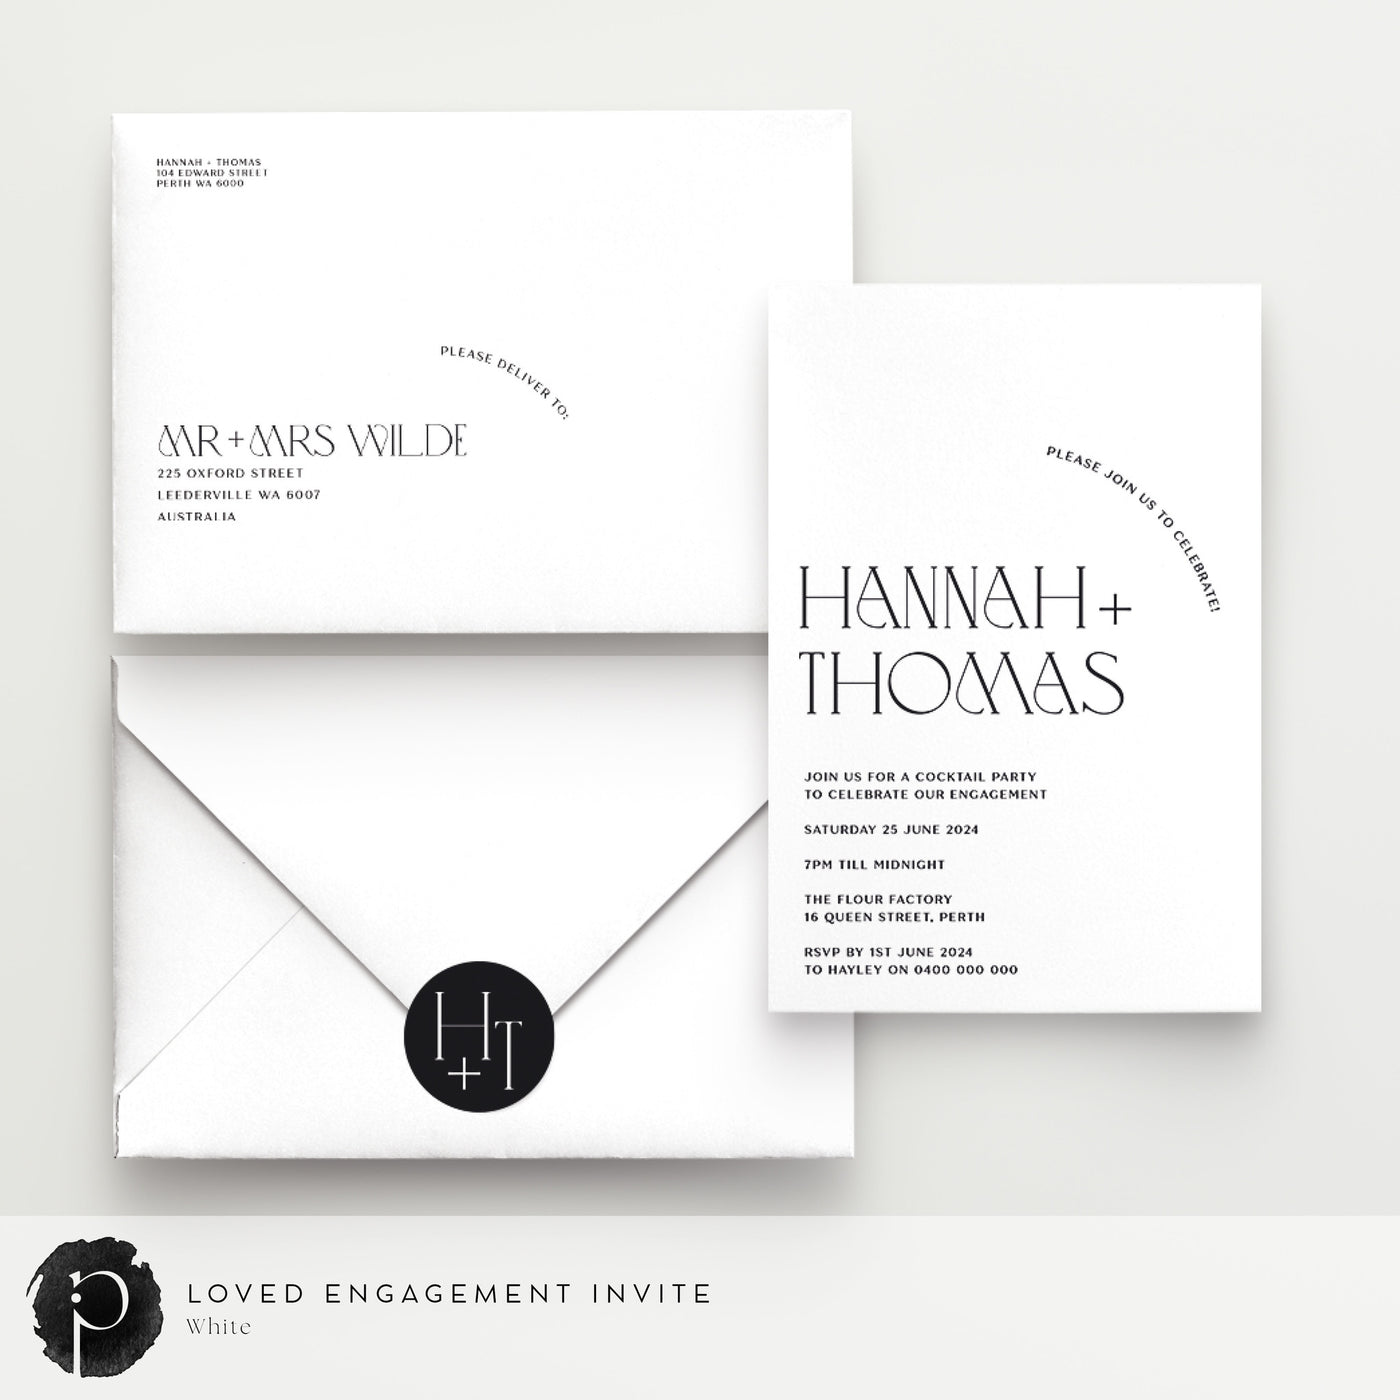 Loved - Engagement Invitations